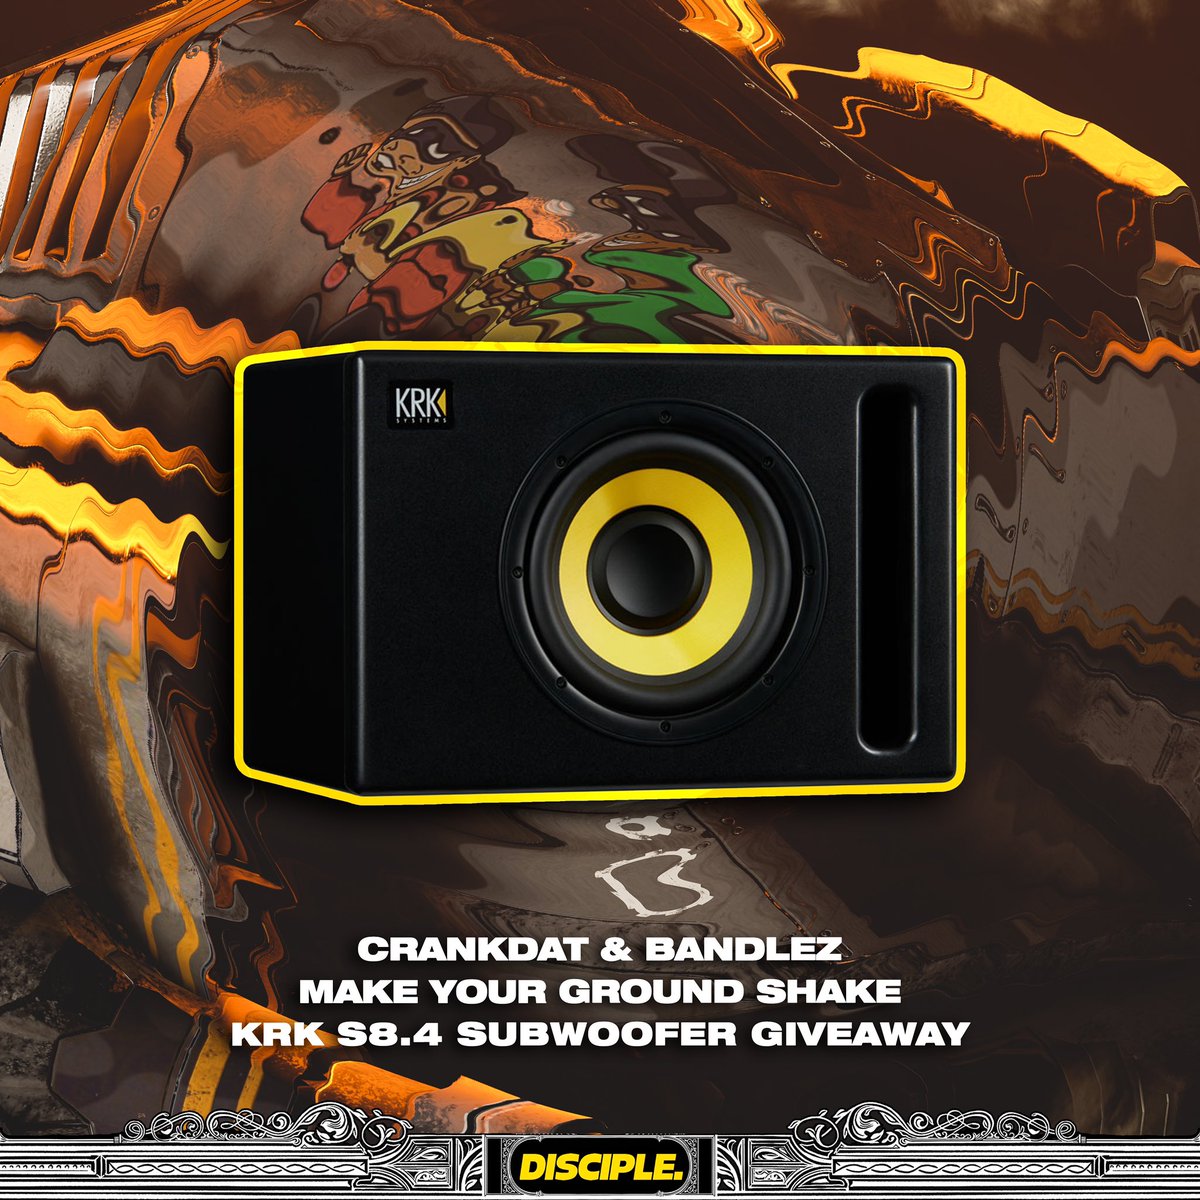 YOOOO so to celebrate “ground shake” w/ @bandlez coming out friday WE’RE GIVING AWAY A SUBWOOFER SO YOU CAN MAKE YOUR GROUND SHAKE 🫠🫠🫠 all you gotta do is presave at linktr.ee/disciple and retweet this tweet and you’ll be entered to win GO GET ITTT